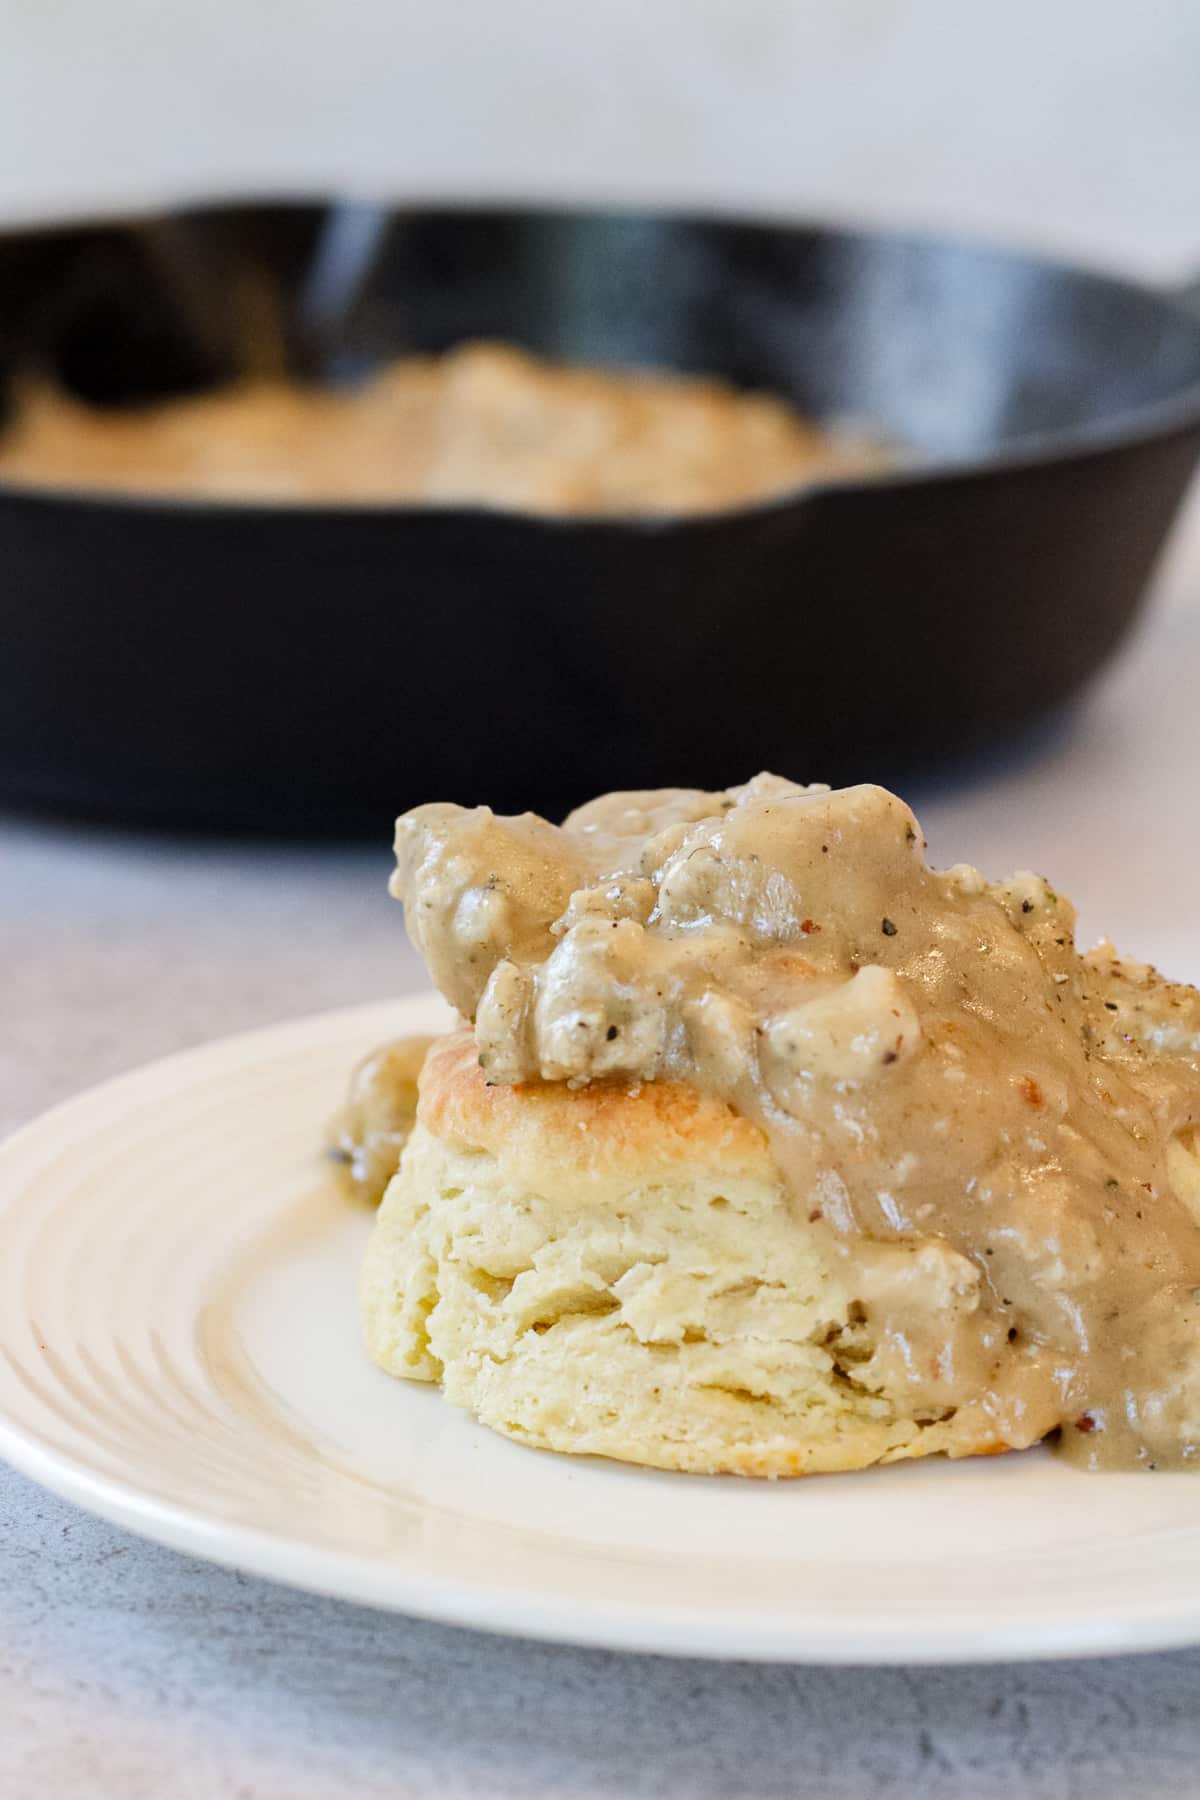 Side image of chicken sausage gravy on a biscuit.